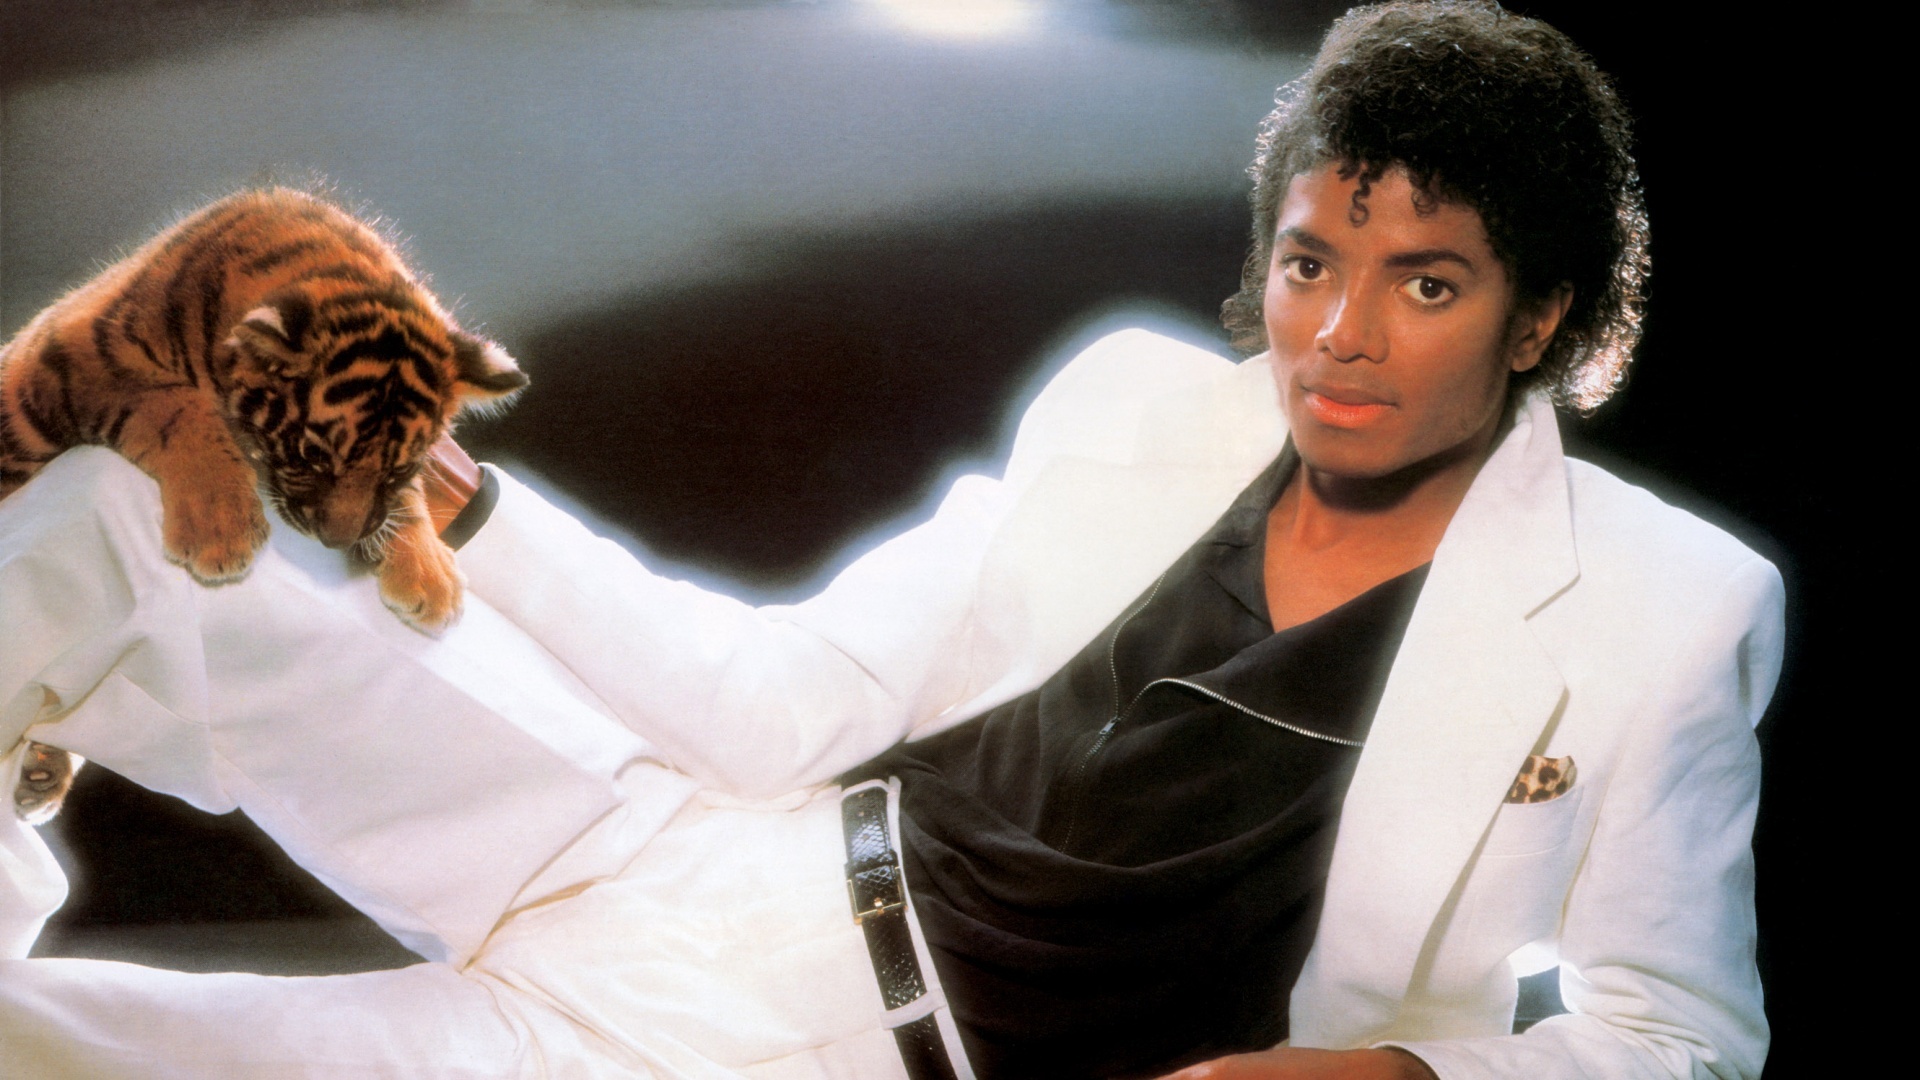 Michael jackson's Thriller is Overrated